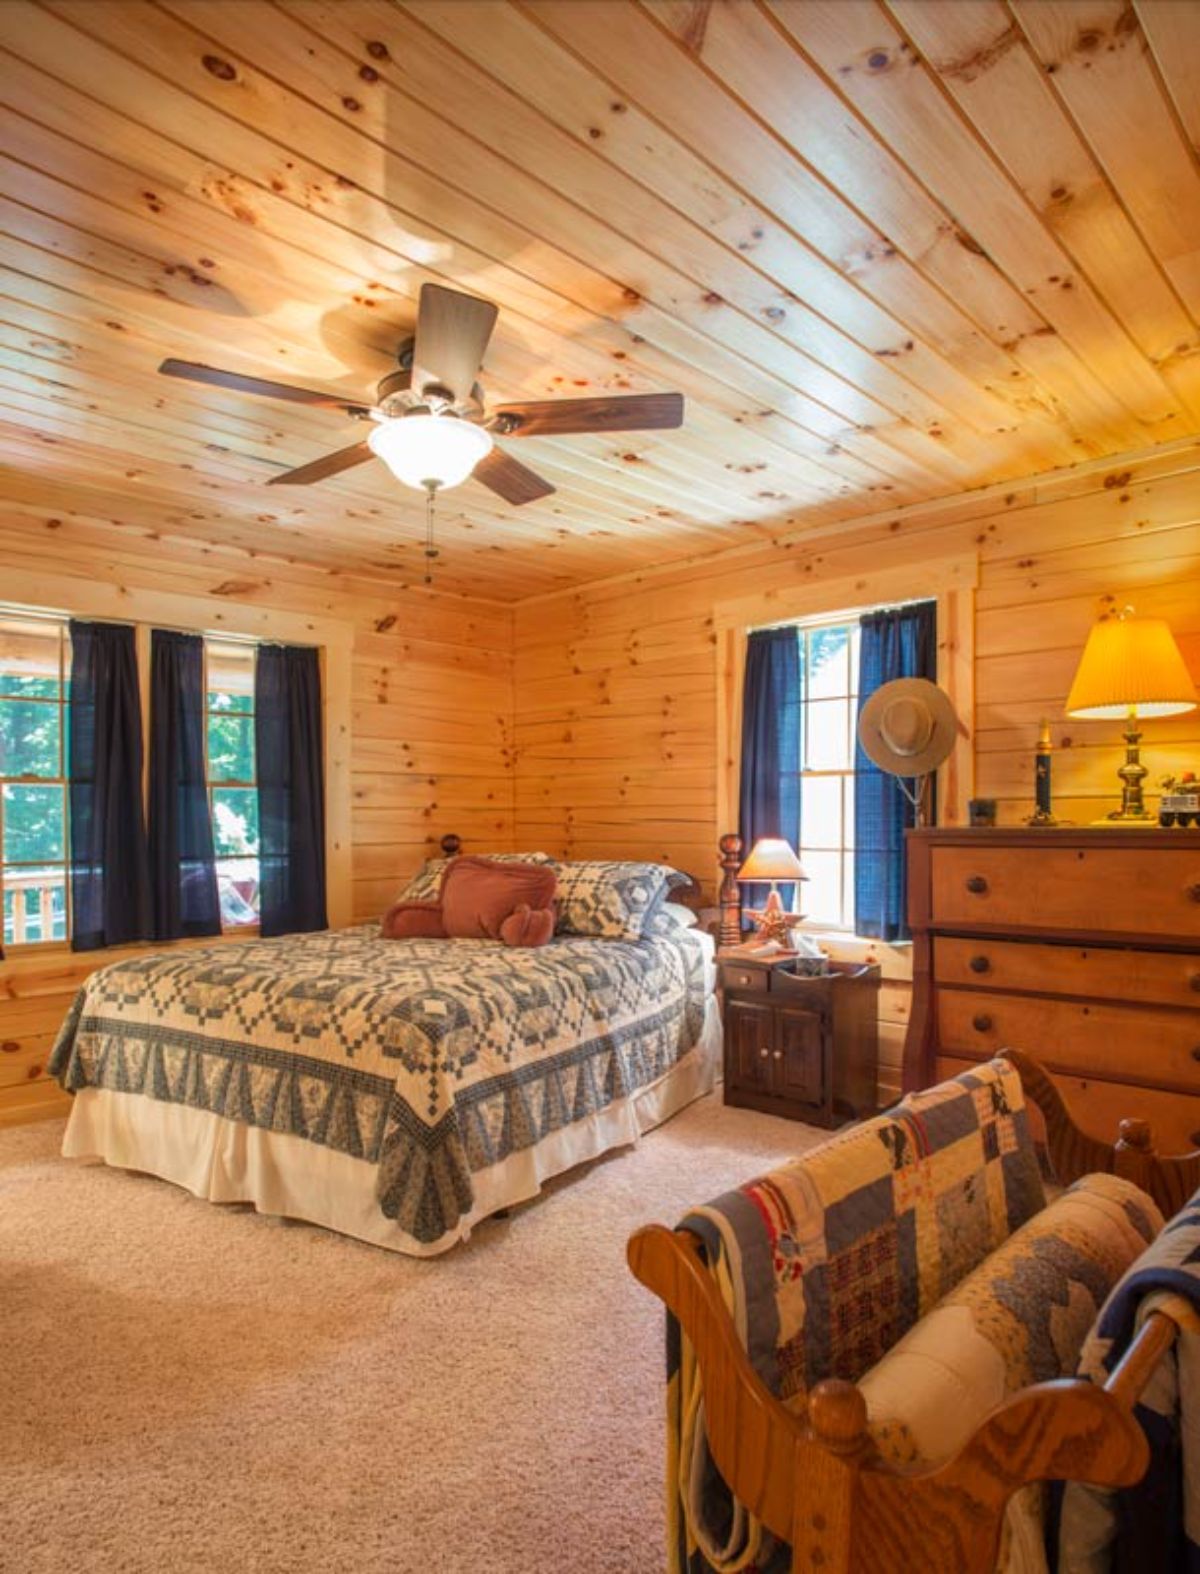 bed against wall in log cabin bedroom with green curtains